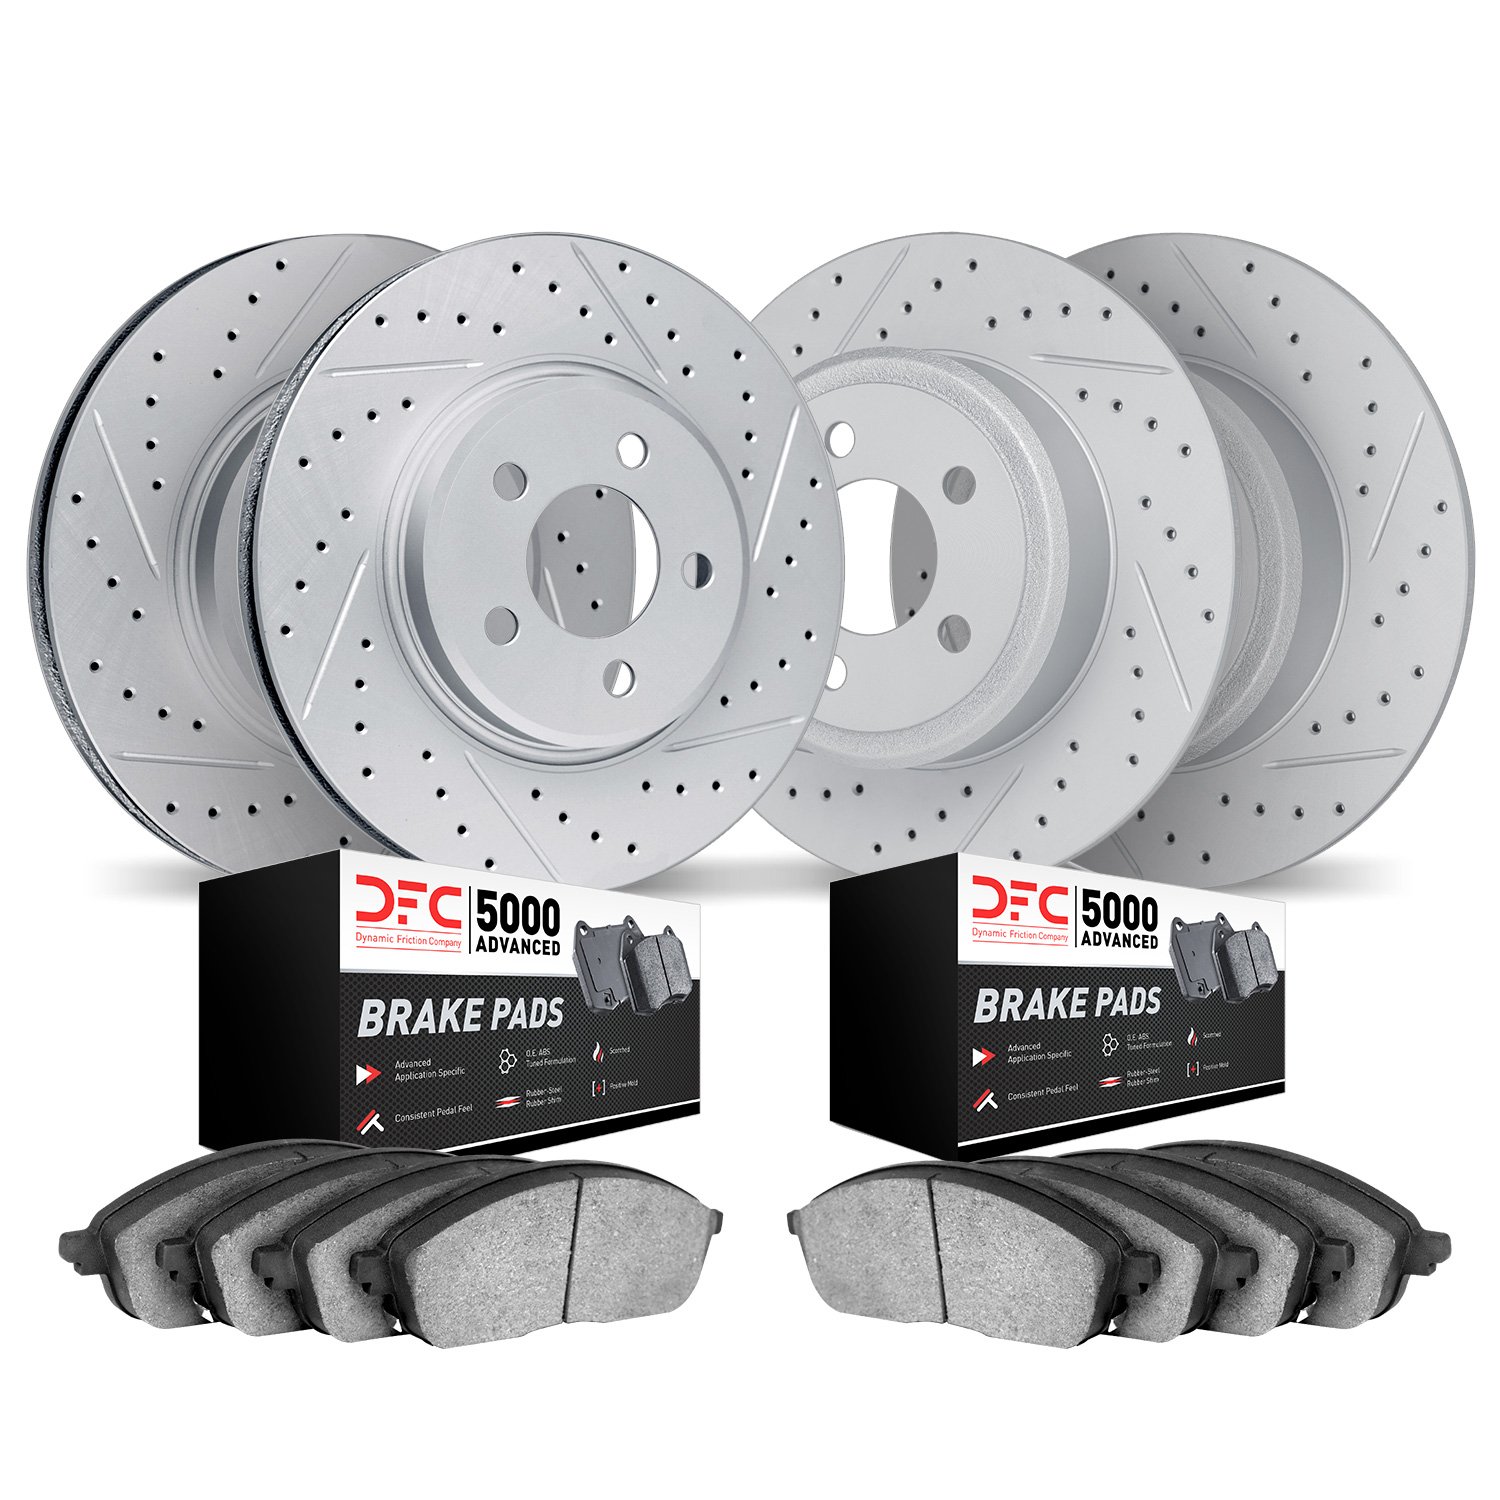 2504-76097 Geoperformance Drilled/Slotted Rotors w/5000 Advanced Brake Pads Kit, 2005-2010 Lexus/Toyota/Scion, Position: Front a